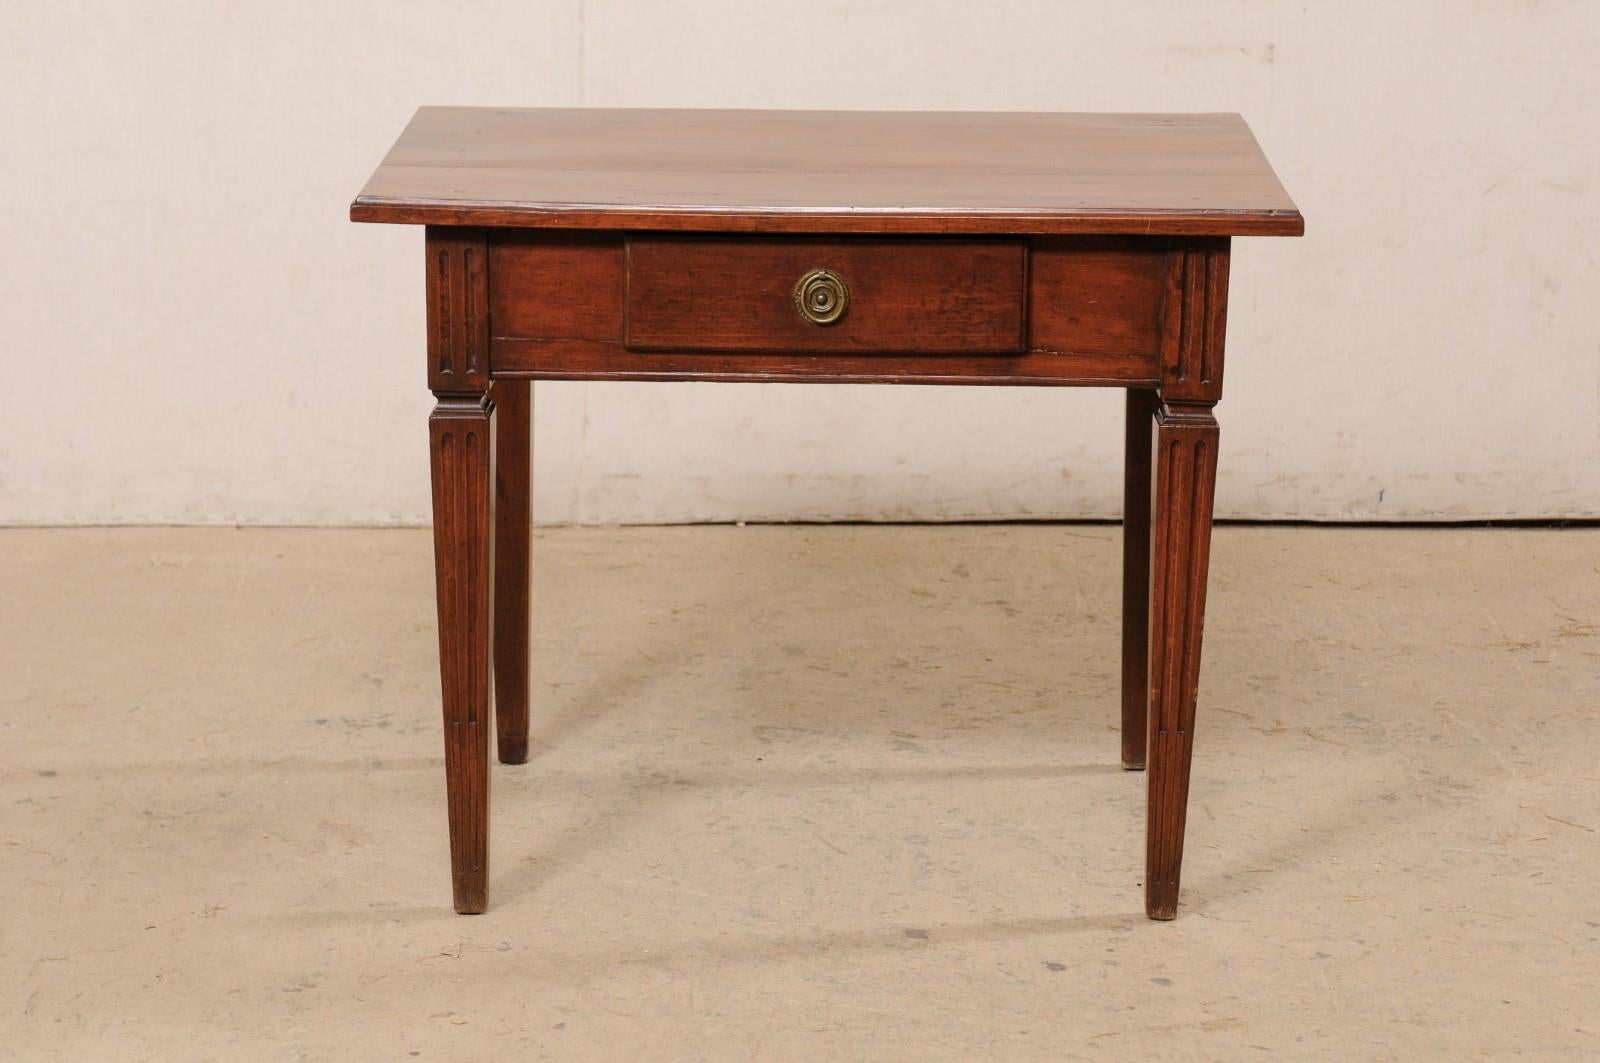 Italian Small Wooden Table w/Drawer Presented on Flute-Carved Legs, 19th C. For Sale 6